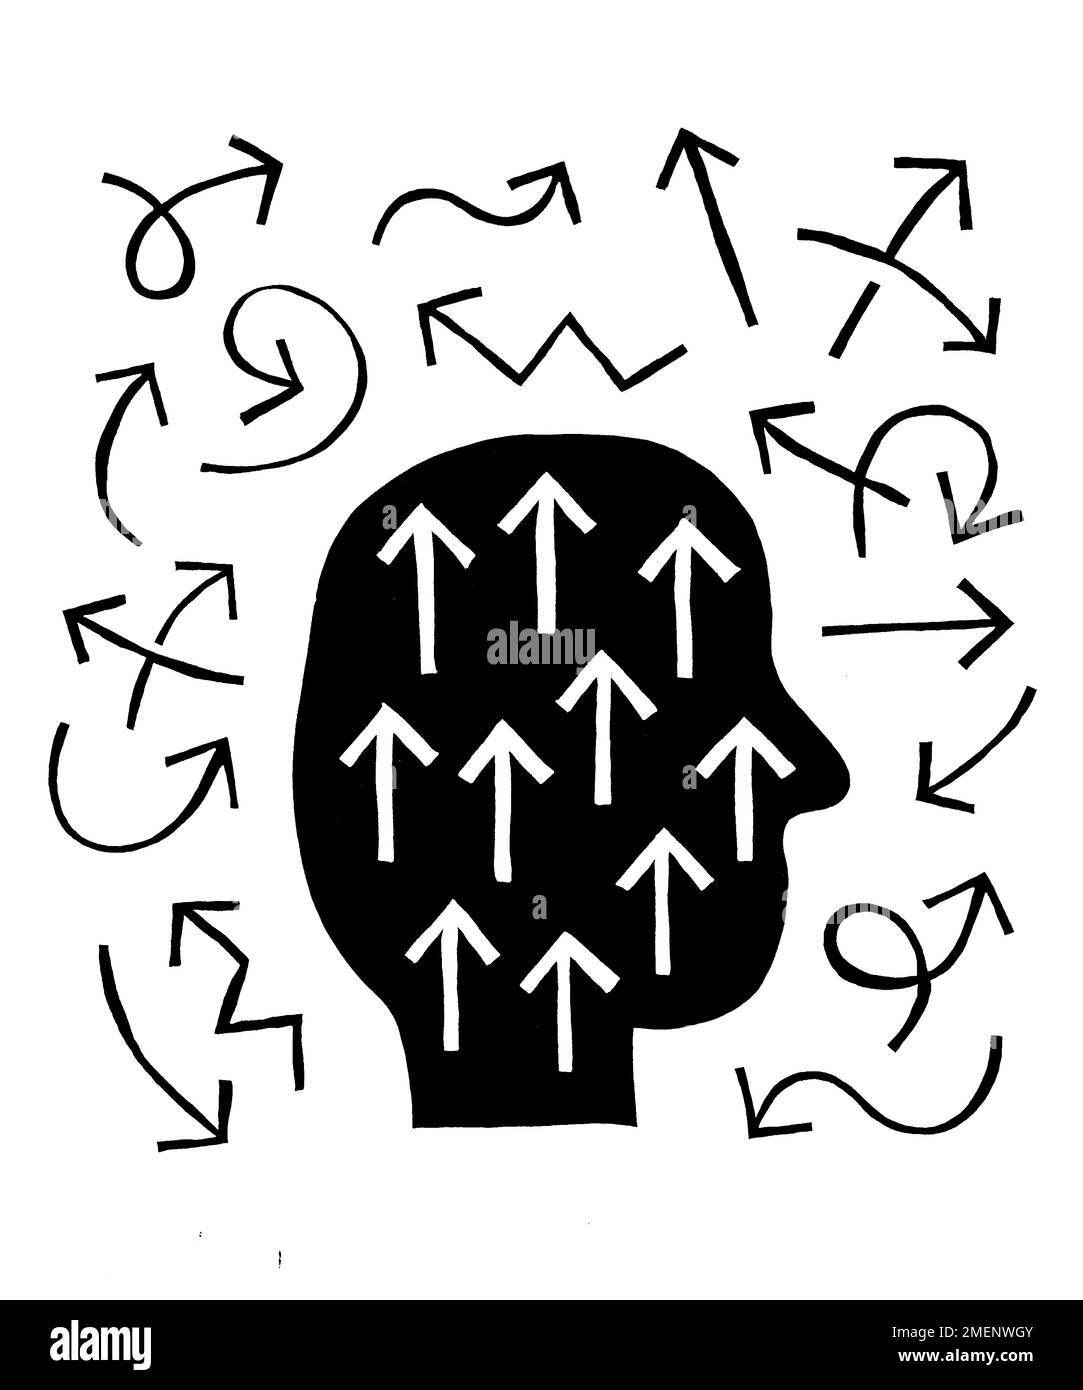 Black and white illustration representing coping with chaos Stock Photo